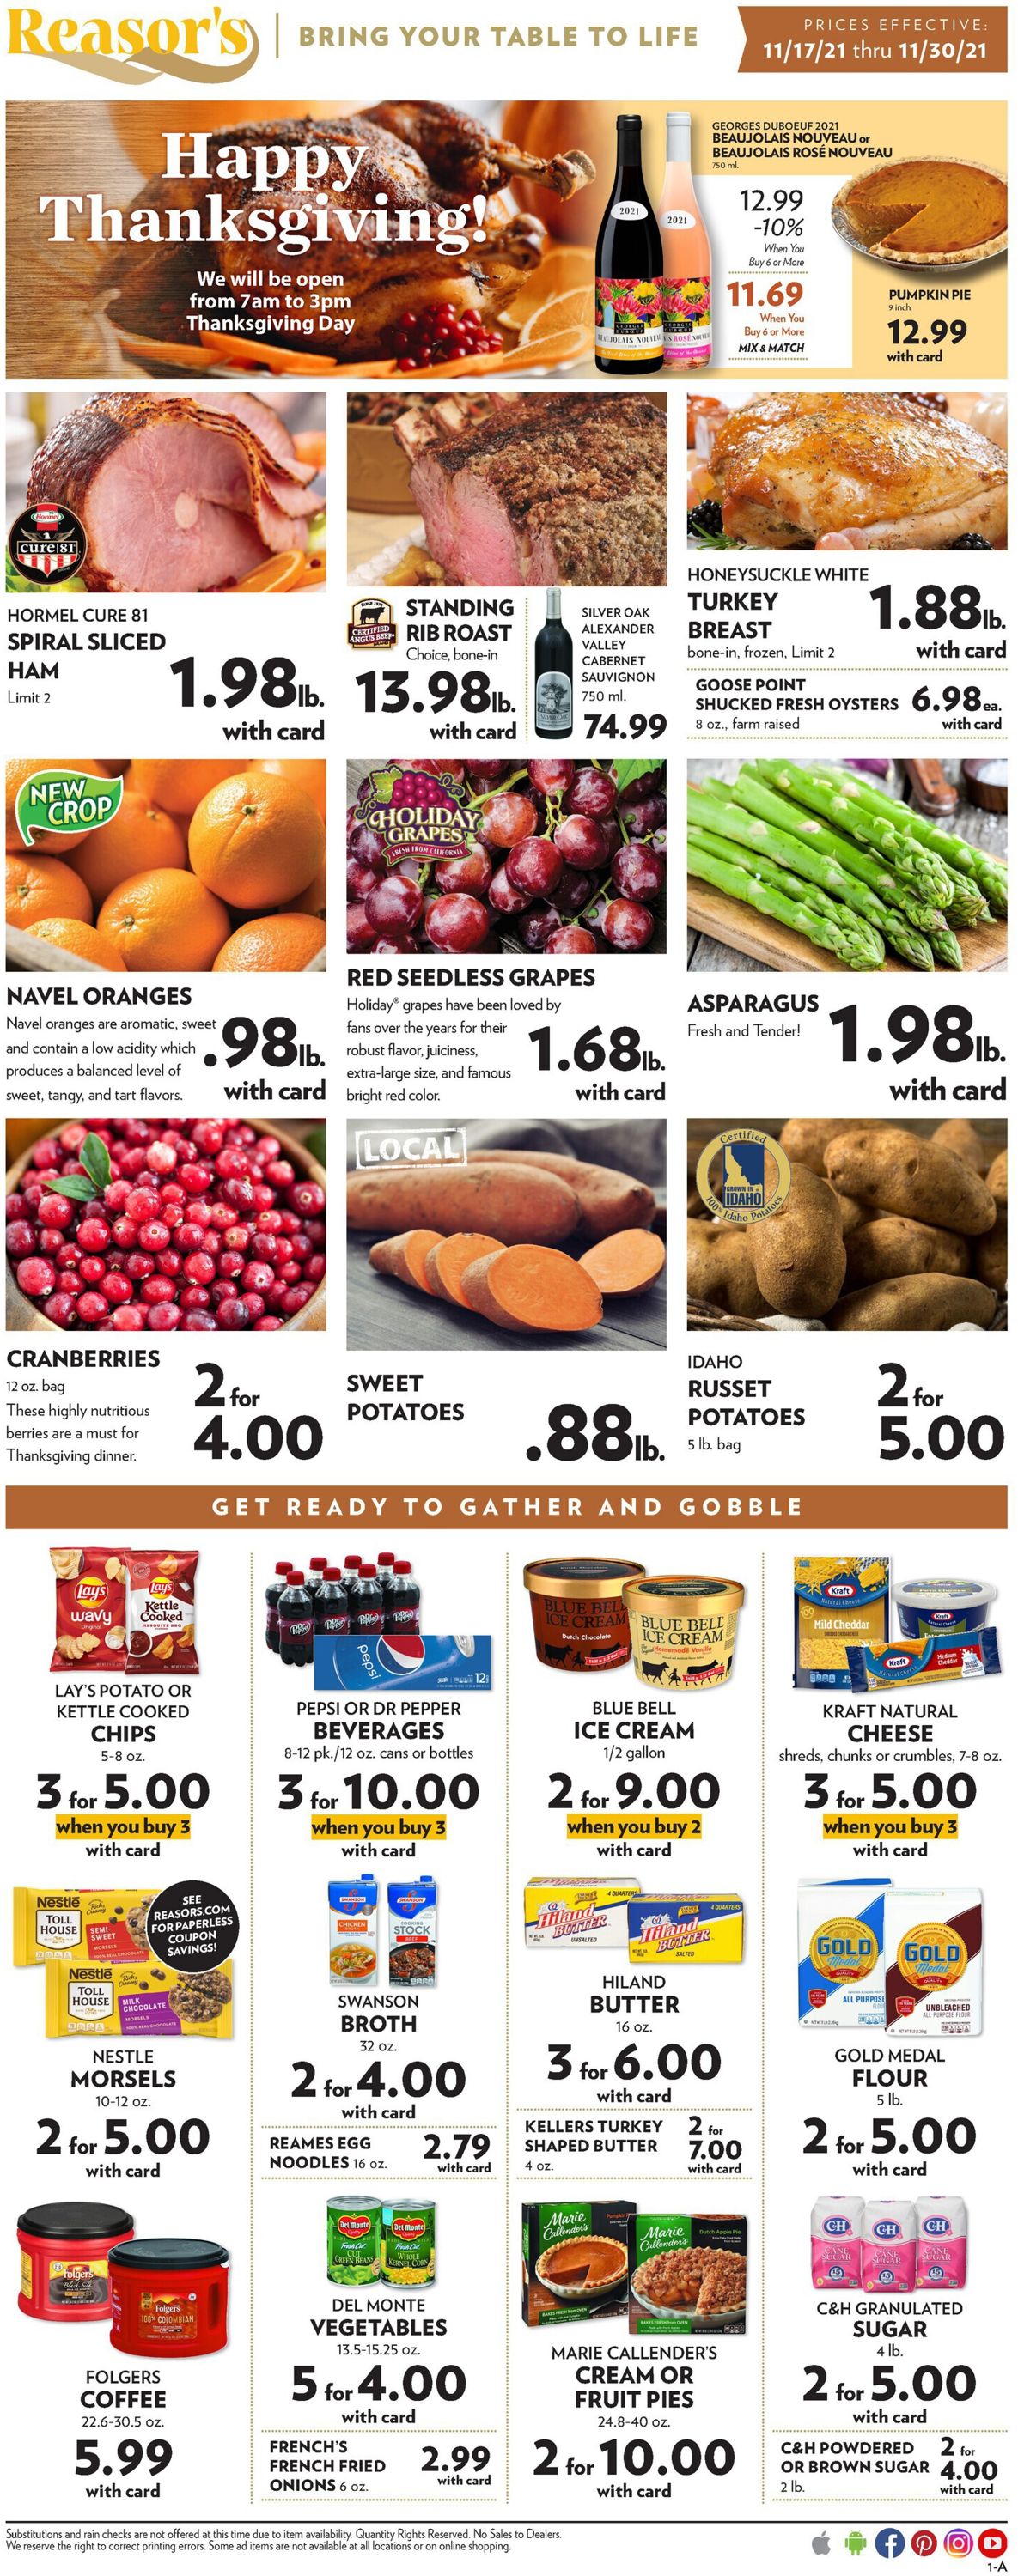 Reasor's THANKSGIVING 2021 Current weekly ad 11/17 11/30/2021